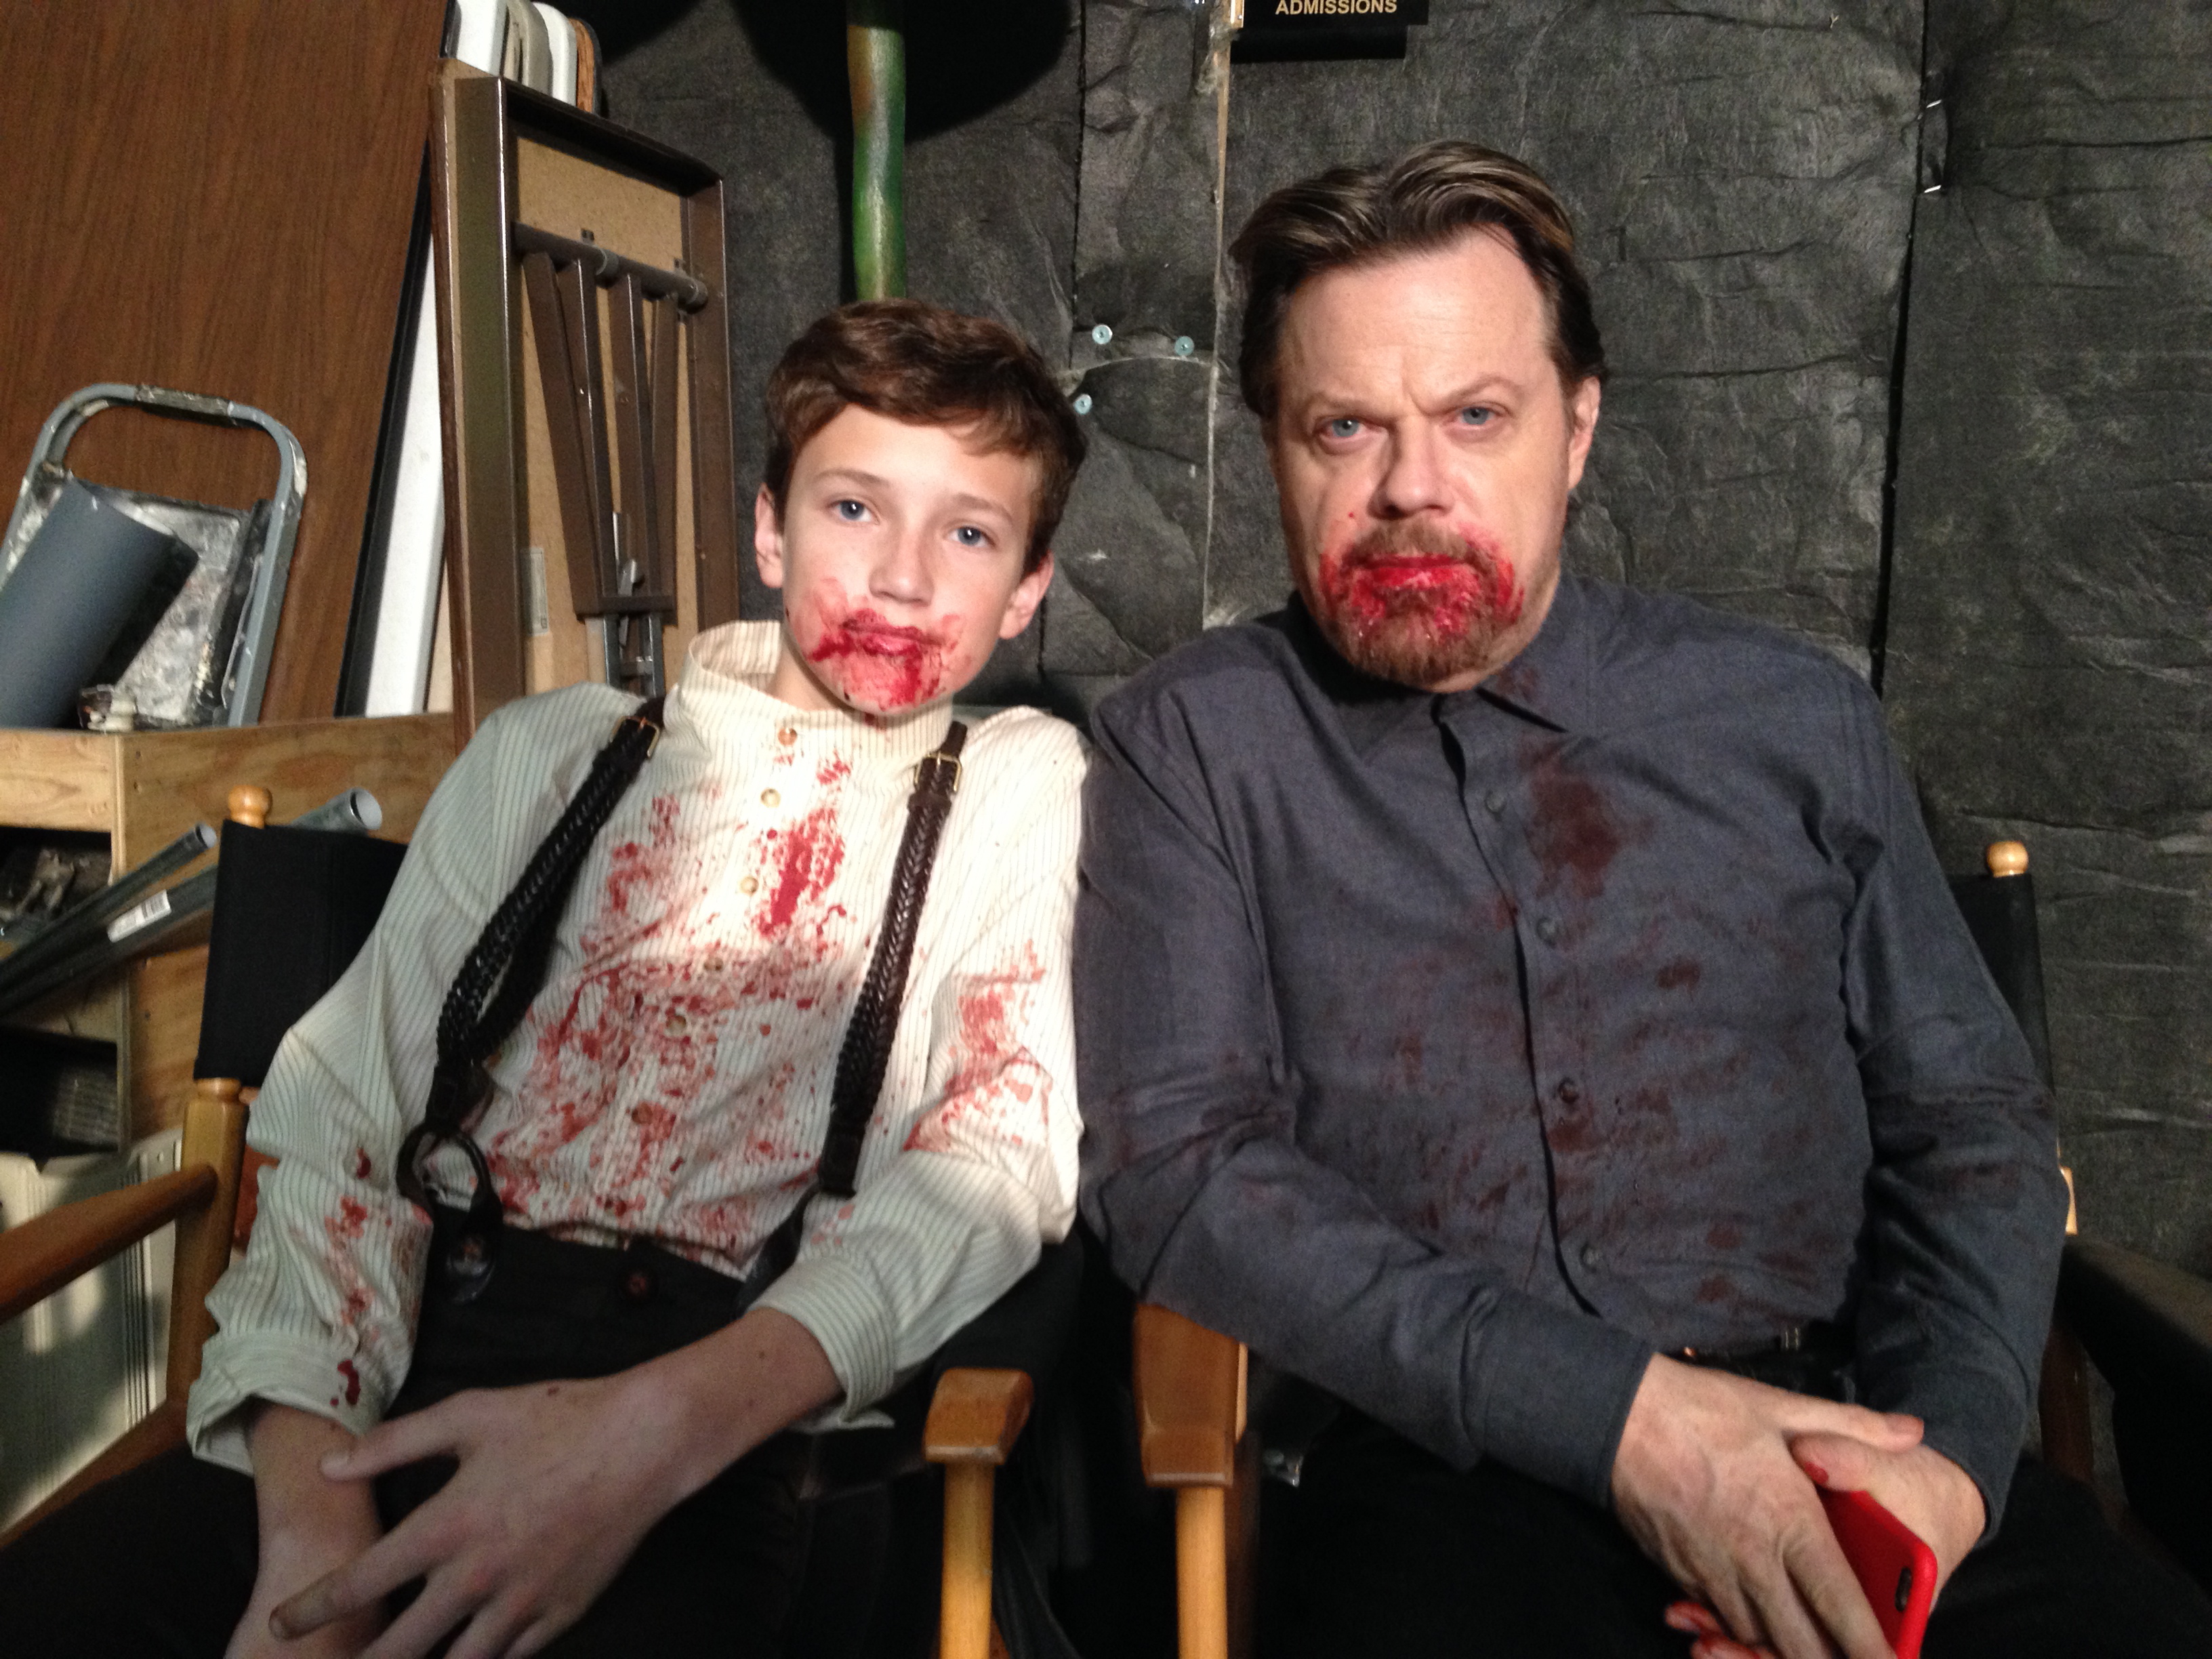 Young Wolfe and Wolfe (AKA Eddie Izzard) on set and ready to shoot